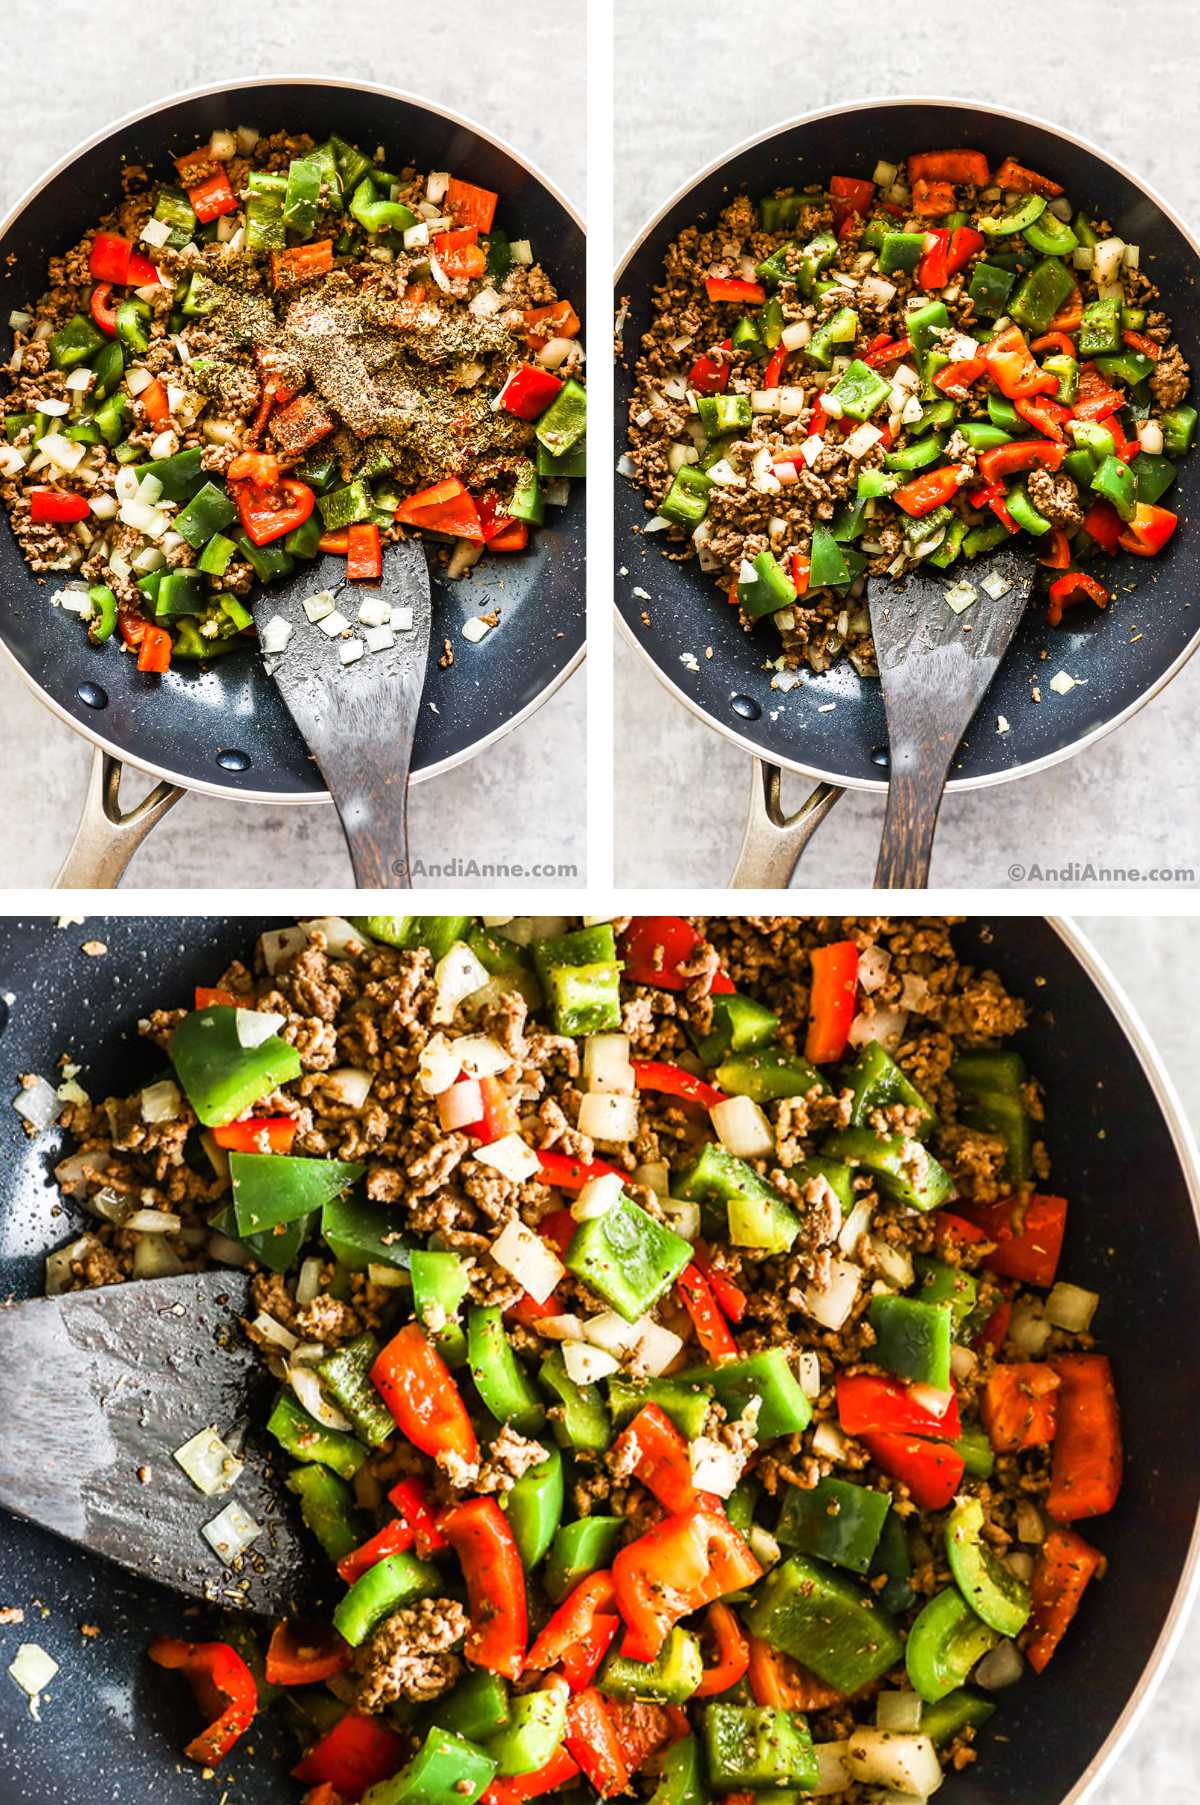 Three overhead images in one: 1. Spices added to beef and veggie mix in frying pan. 2. All ingredients mixed together. 3. Closeup of onions, bell peppers, spices and ground beef mixed and cooked. 